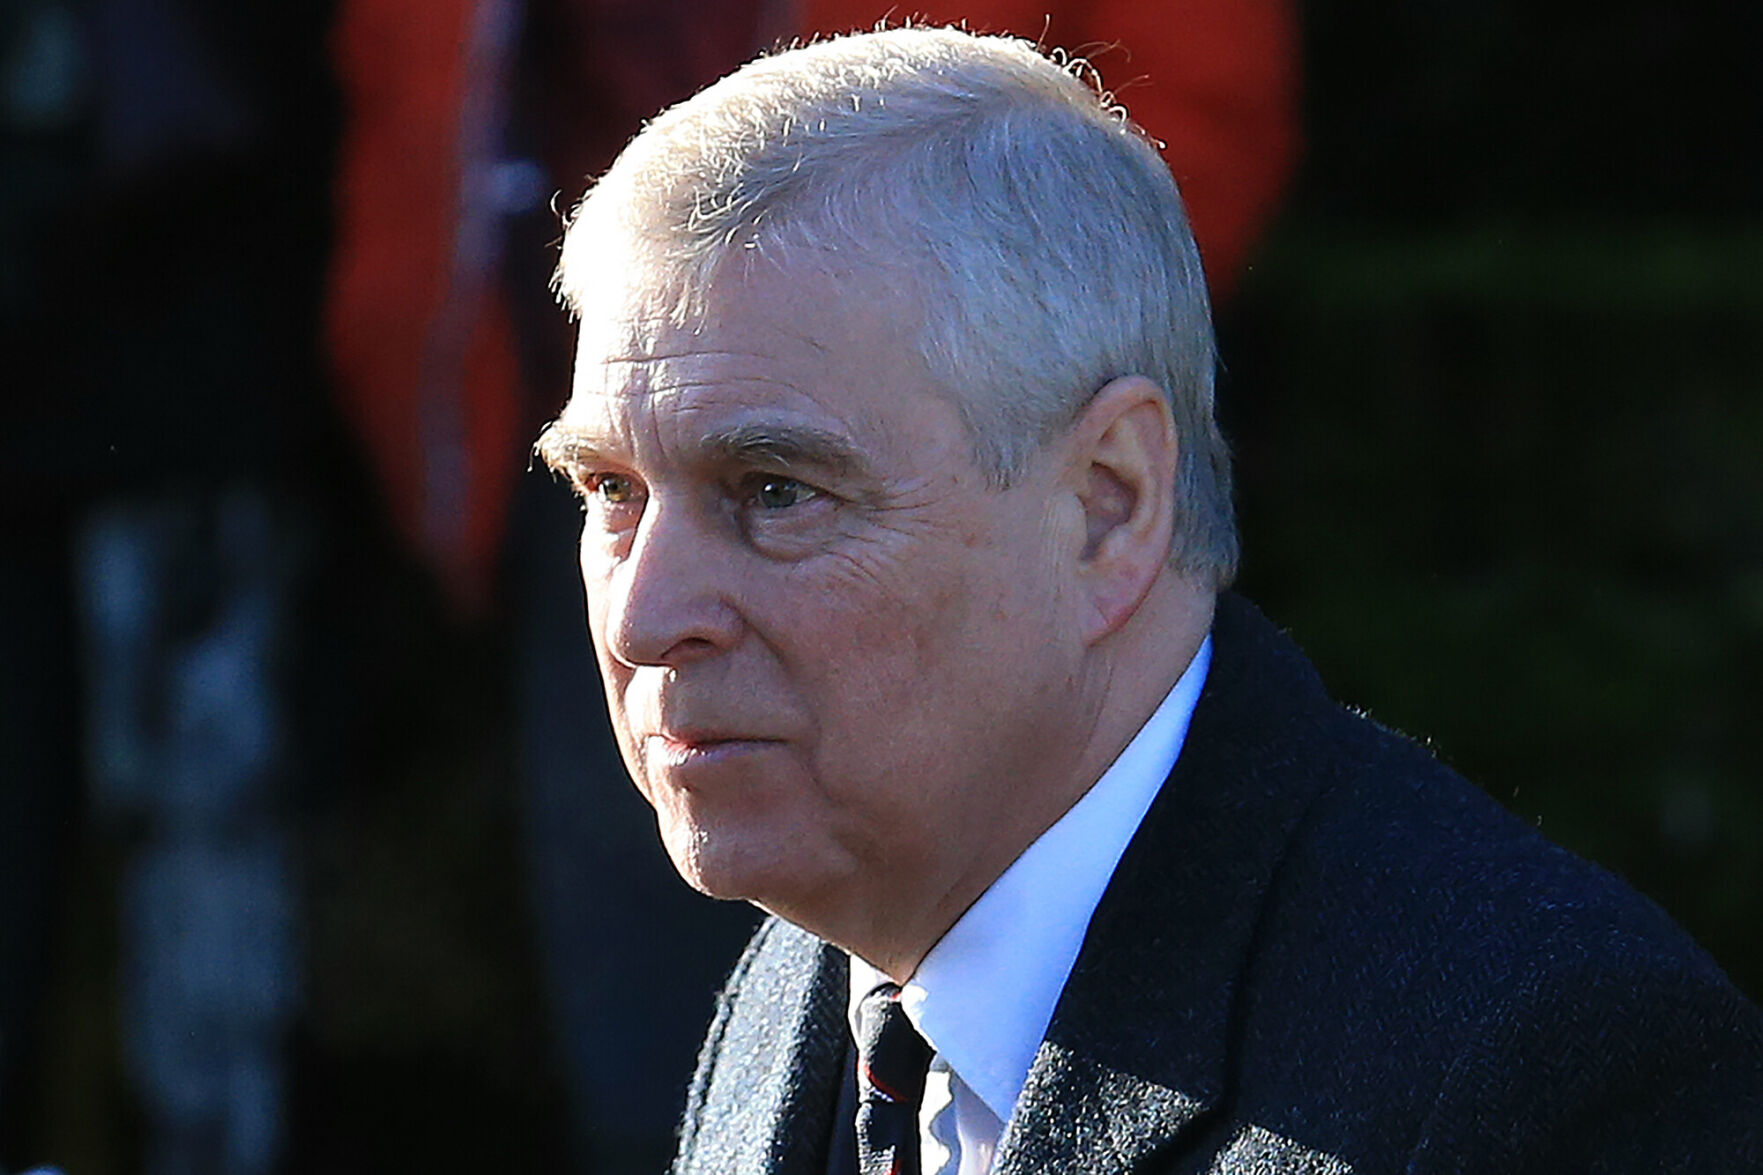 Prince Andrew stripped of military titles and charities amid sex abuse lawsuit National kdrv image